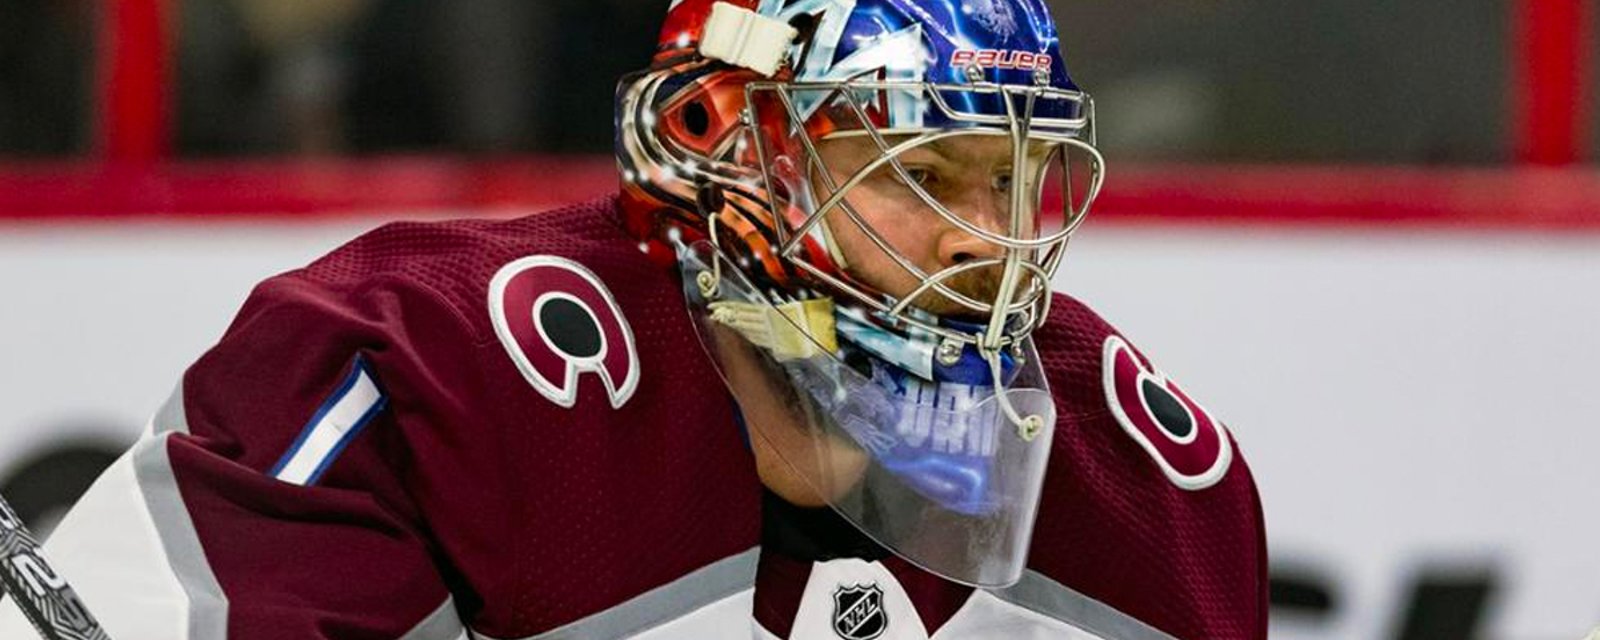 Varlamov signs a very strange contract with the Islanders